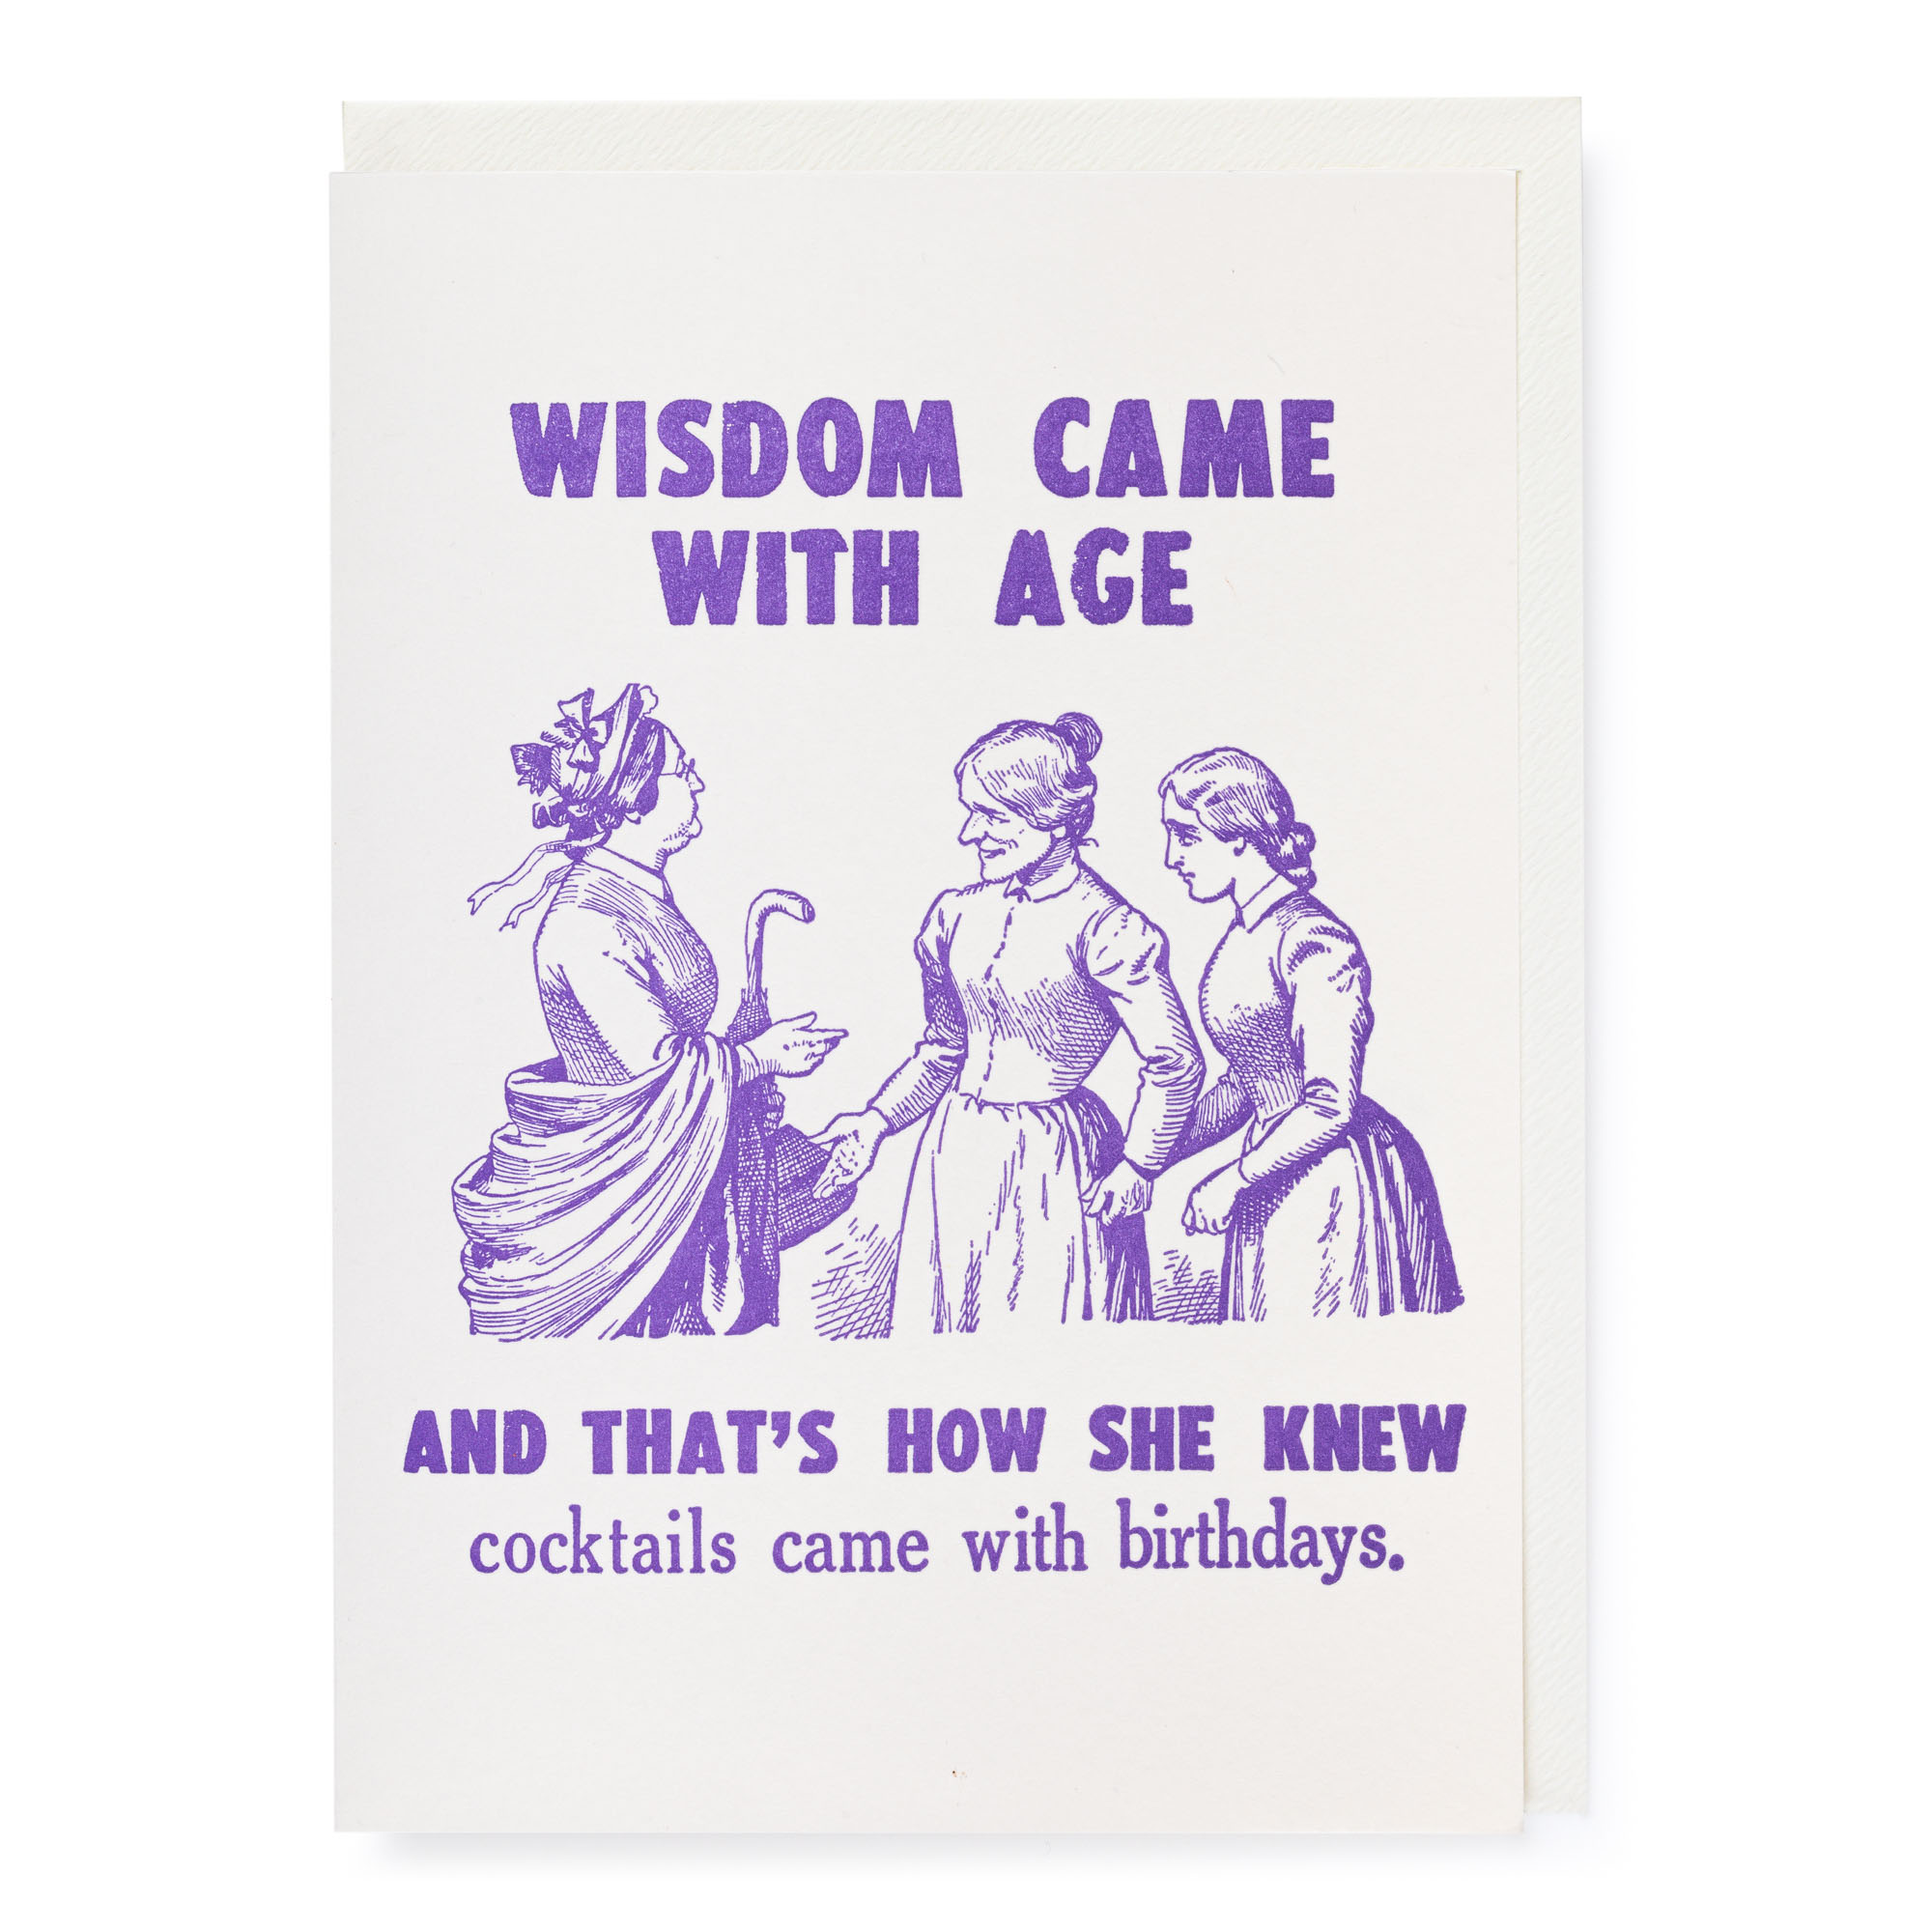 Wisdom came with age - Letterpress Cards - Zeichen Press - from Archivist Gallery 